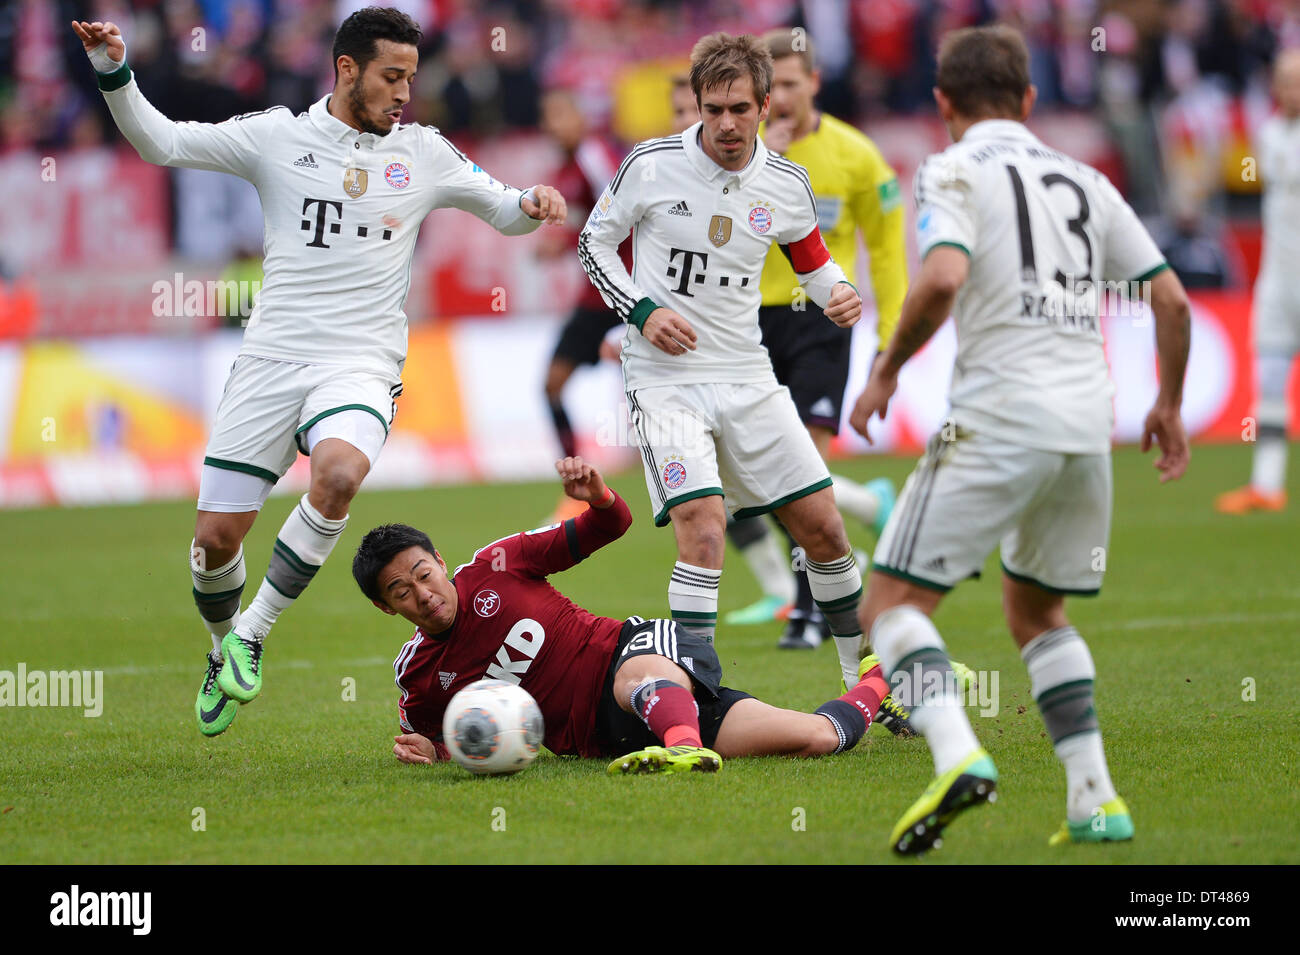 Nuremberg, Germany. 08th Feb, 2014. Nuremberg's Hiroshi Kiyotake (ON THE GROUND) vies for the ball with Munich's Thiago Alcantara (L-R), Philipp Lahm and Rafinha during the Bundesliga soccer match between 1. FC Nuremberg and FC Bayern München at Grundig-Stadium in Nuremberg, Germany, 08 February 2014. Photo: DAVID EBENER/DPA (ATTENTION: Due to the accreditation guidelines, the DFL only permits the publication and utilisation of up to 15 pictures per match on the internet and in online media during the match.)/dpa/Alamy Live News Stock Photo